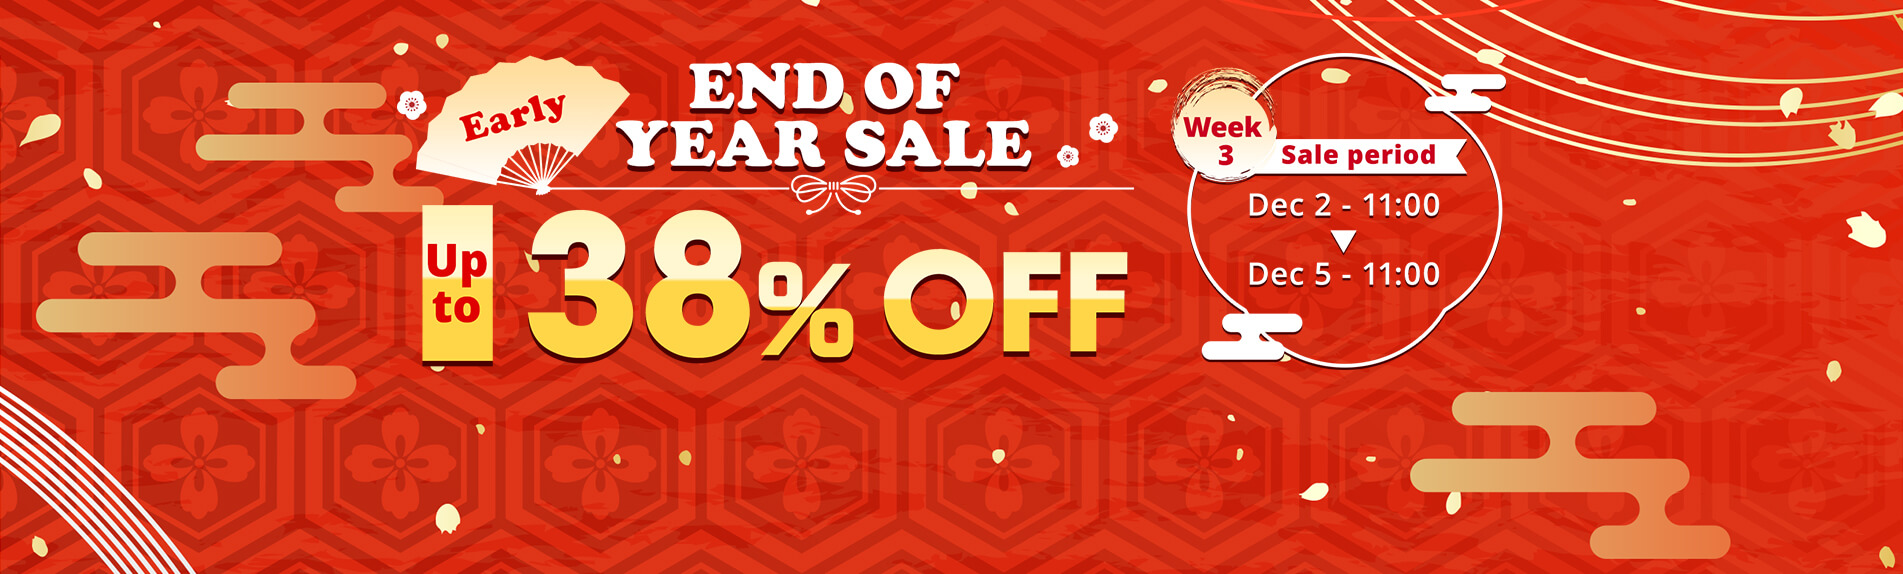 Early End of Year Sale